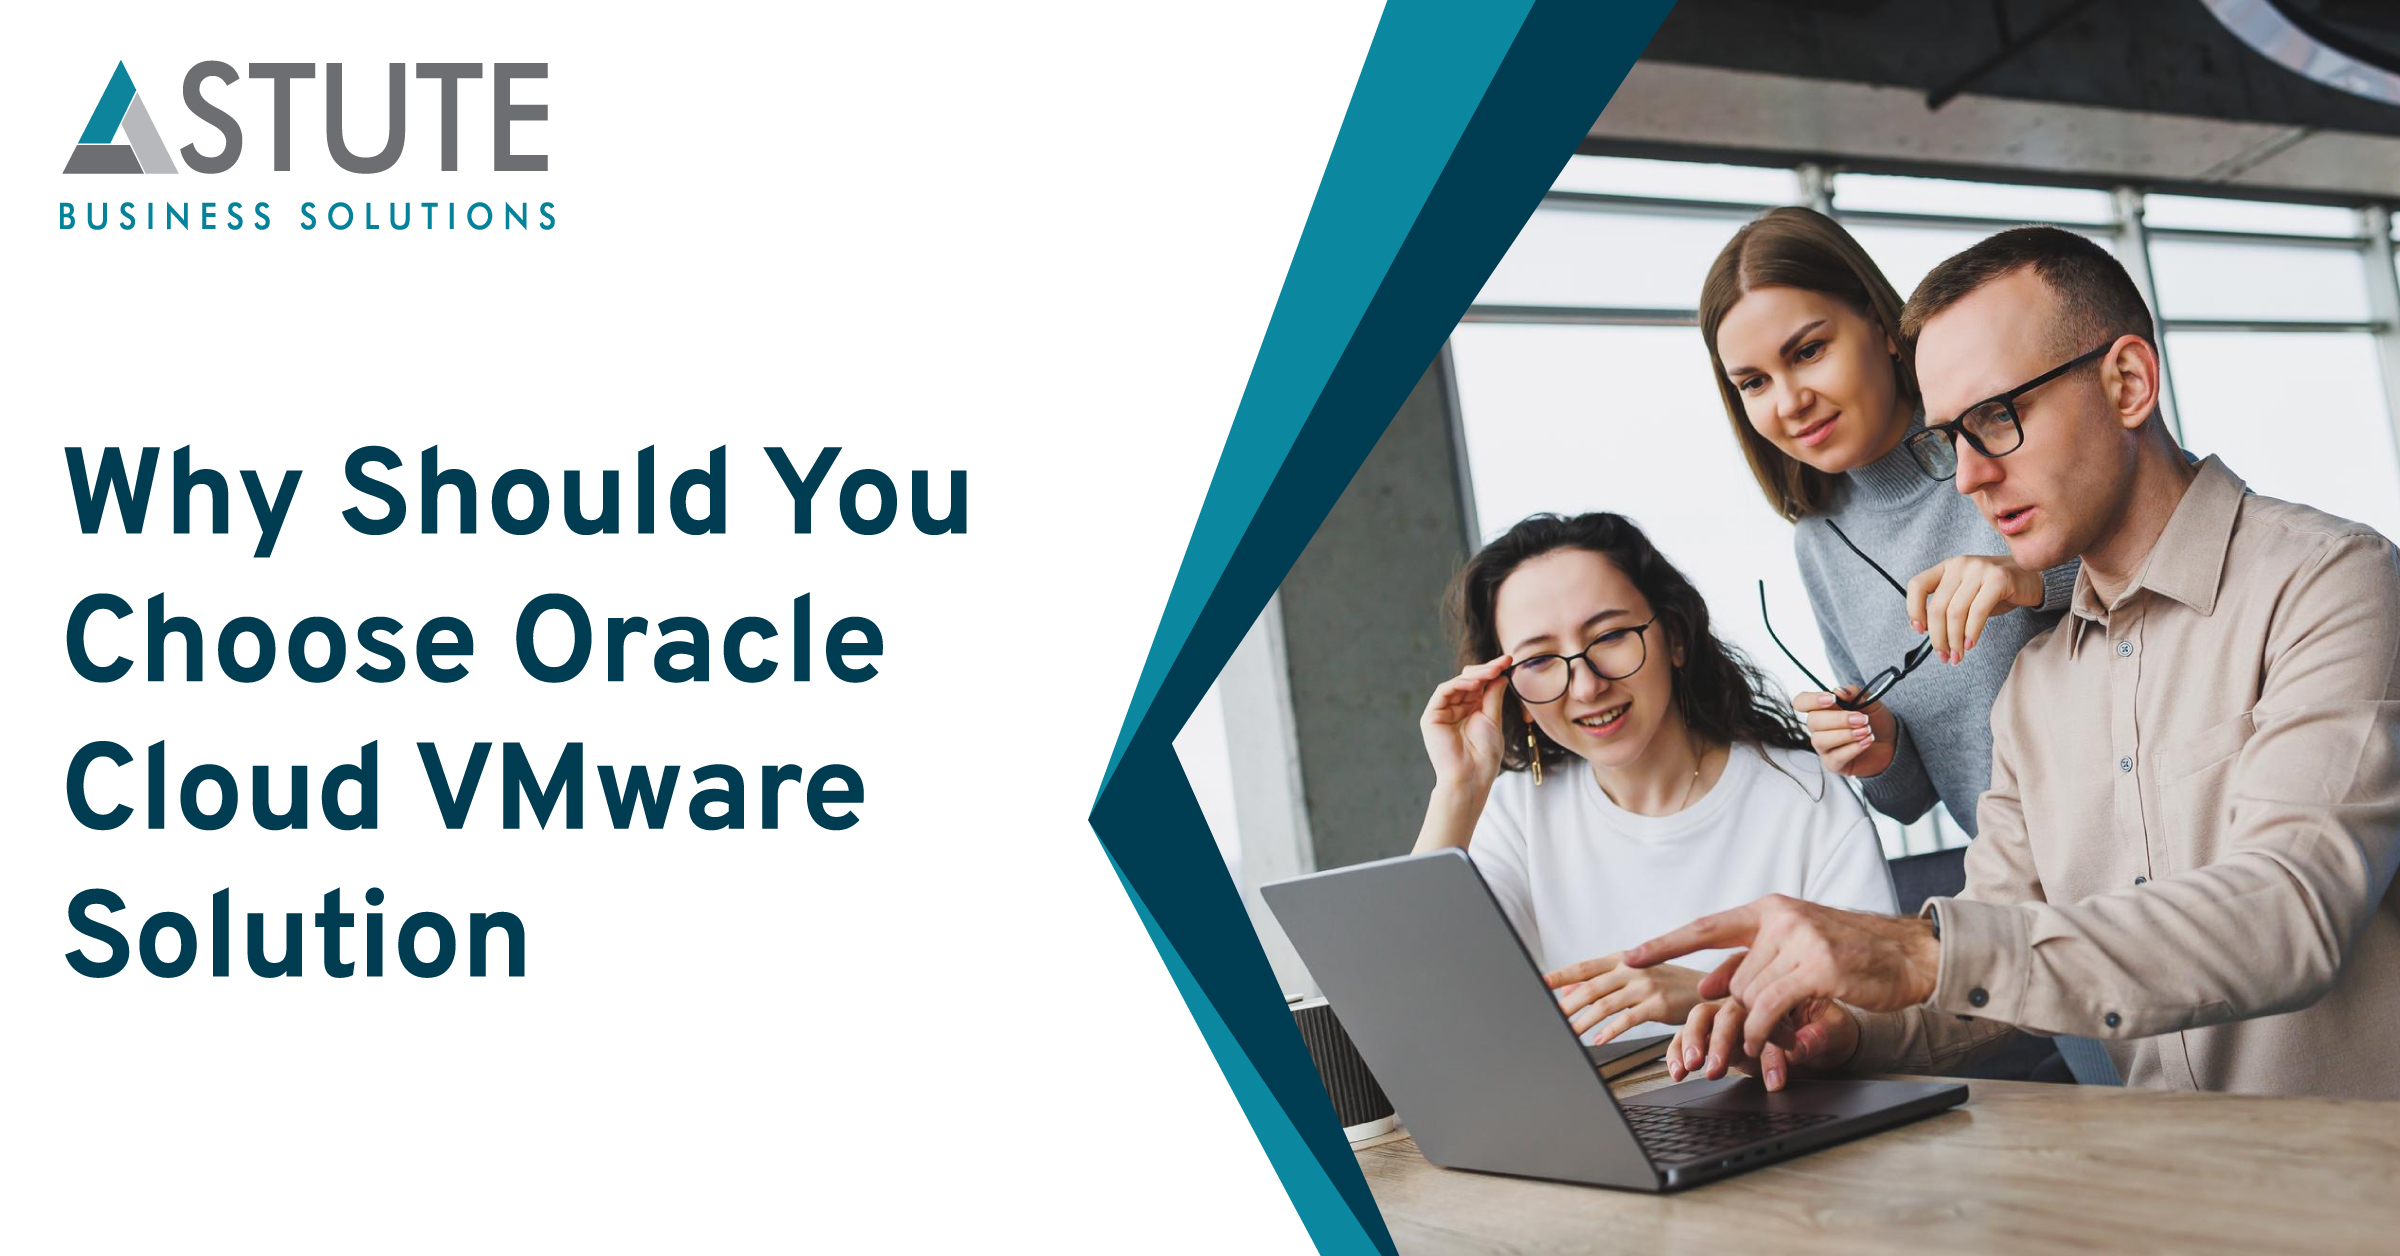 Why Should You Choose Oracle Cloud VMware Solution